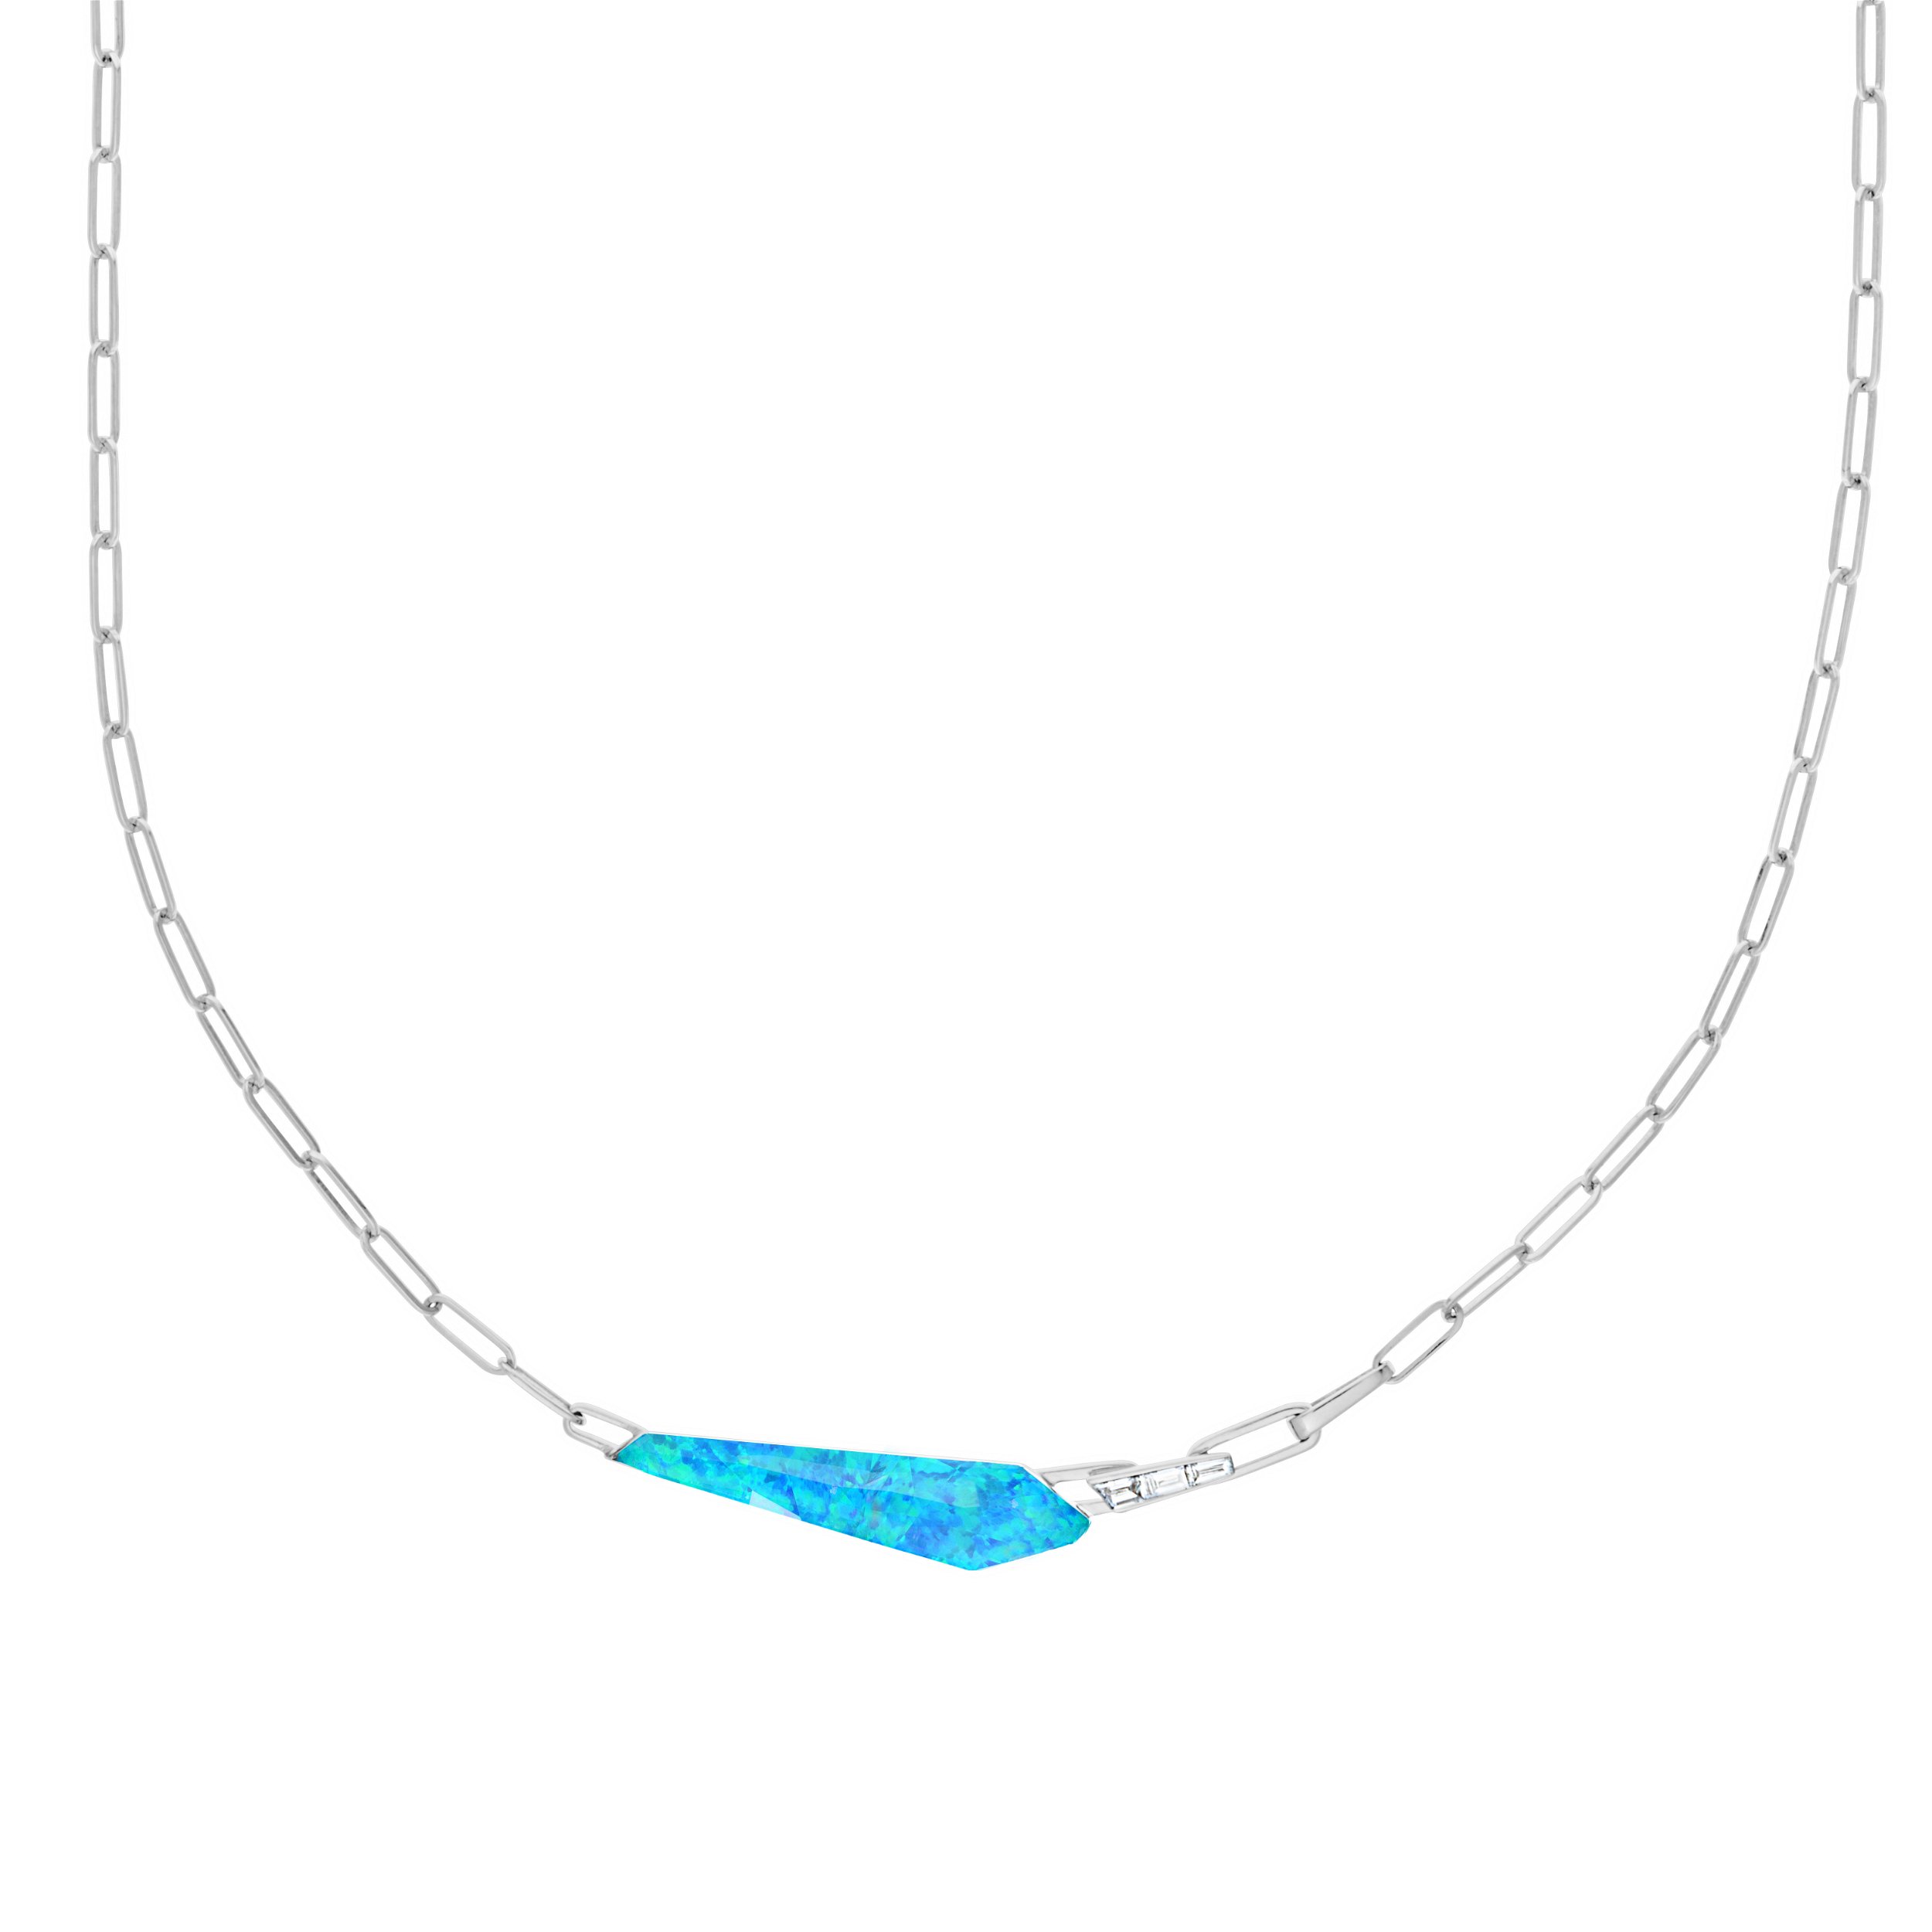 CH2 Shard Slimline Linked Choker Necklace with Black Opalescent in 18kt White Gold - 16.5"